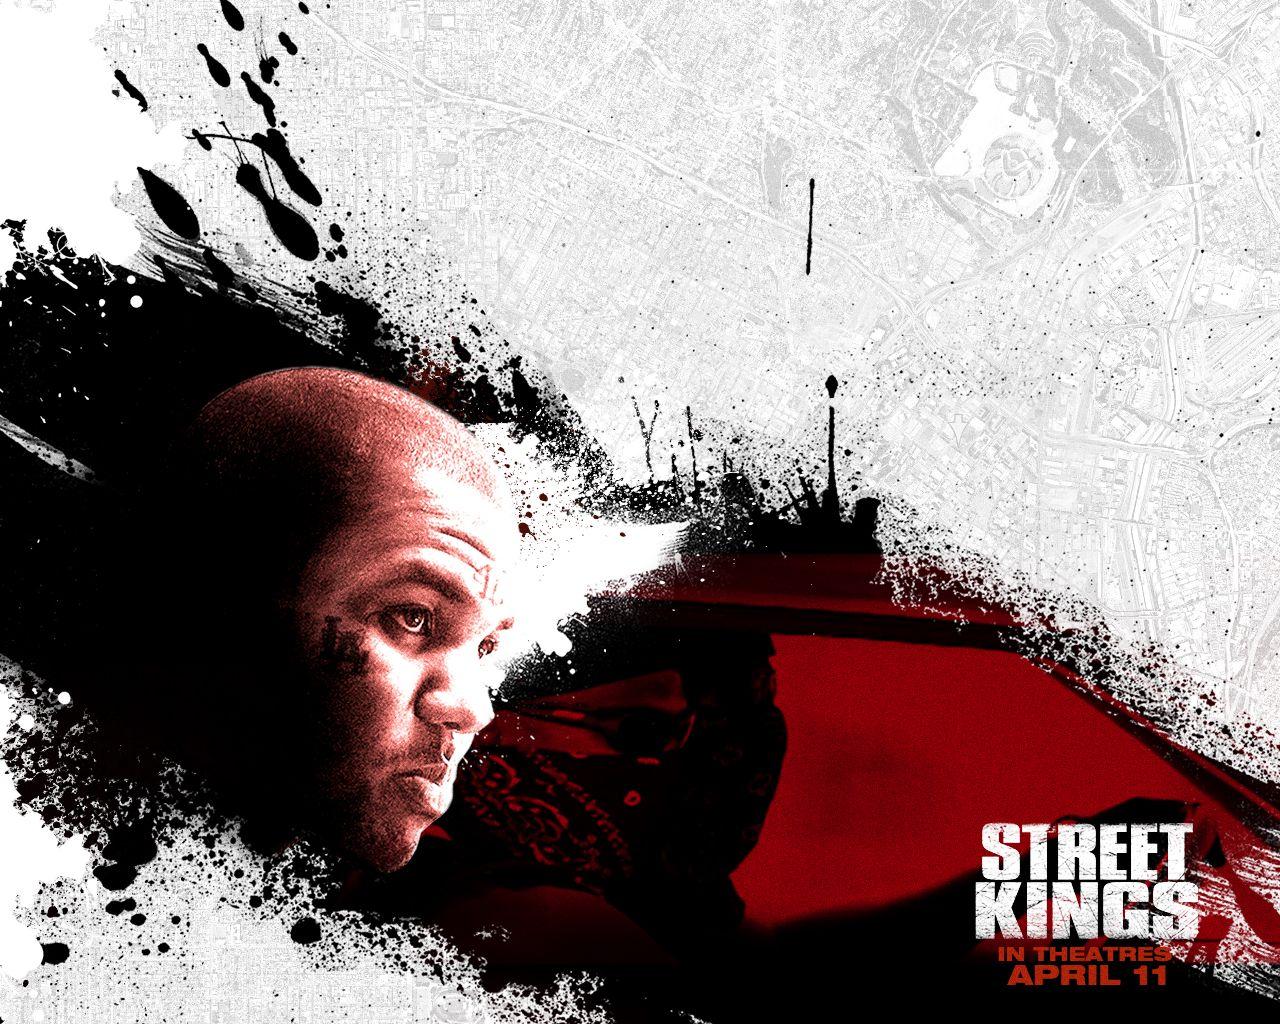 The Game Game in Street Kings Wallpaper 2 800x600